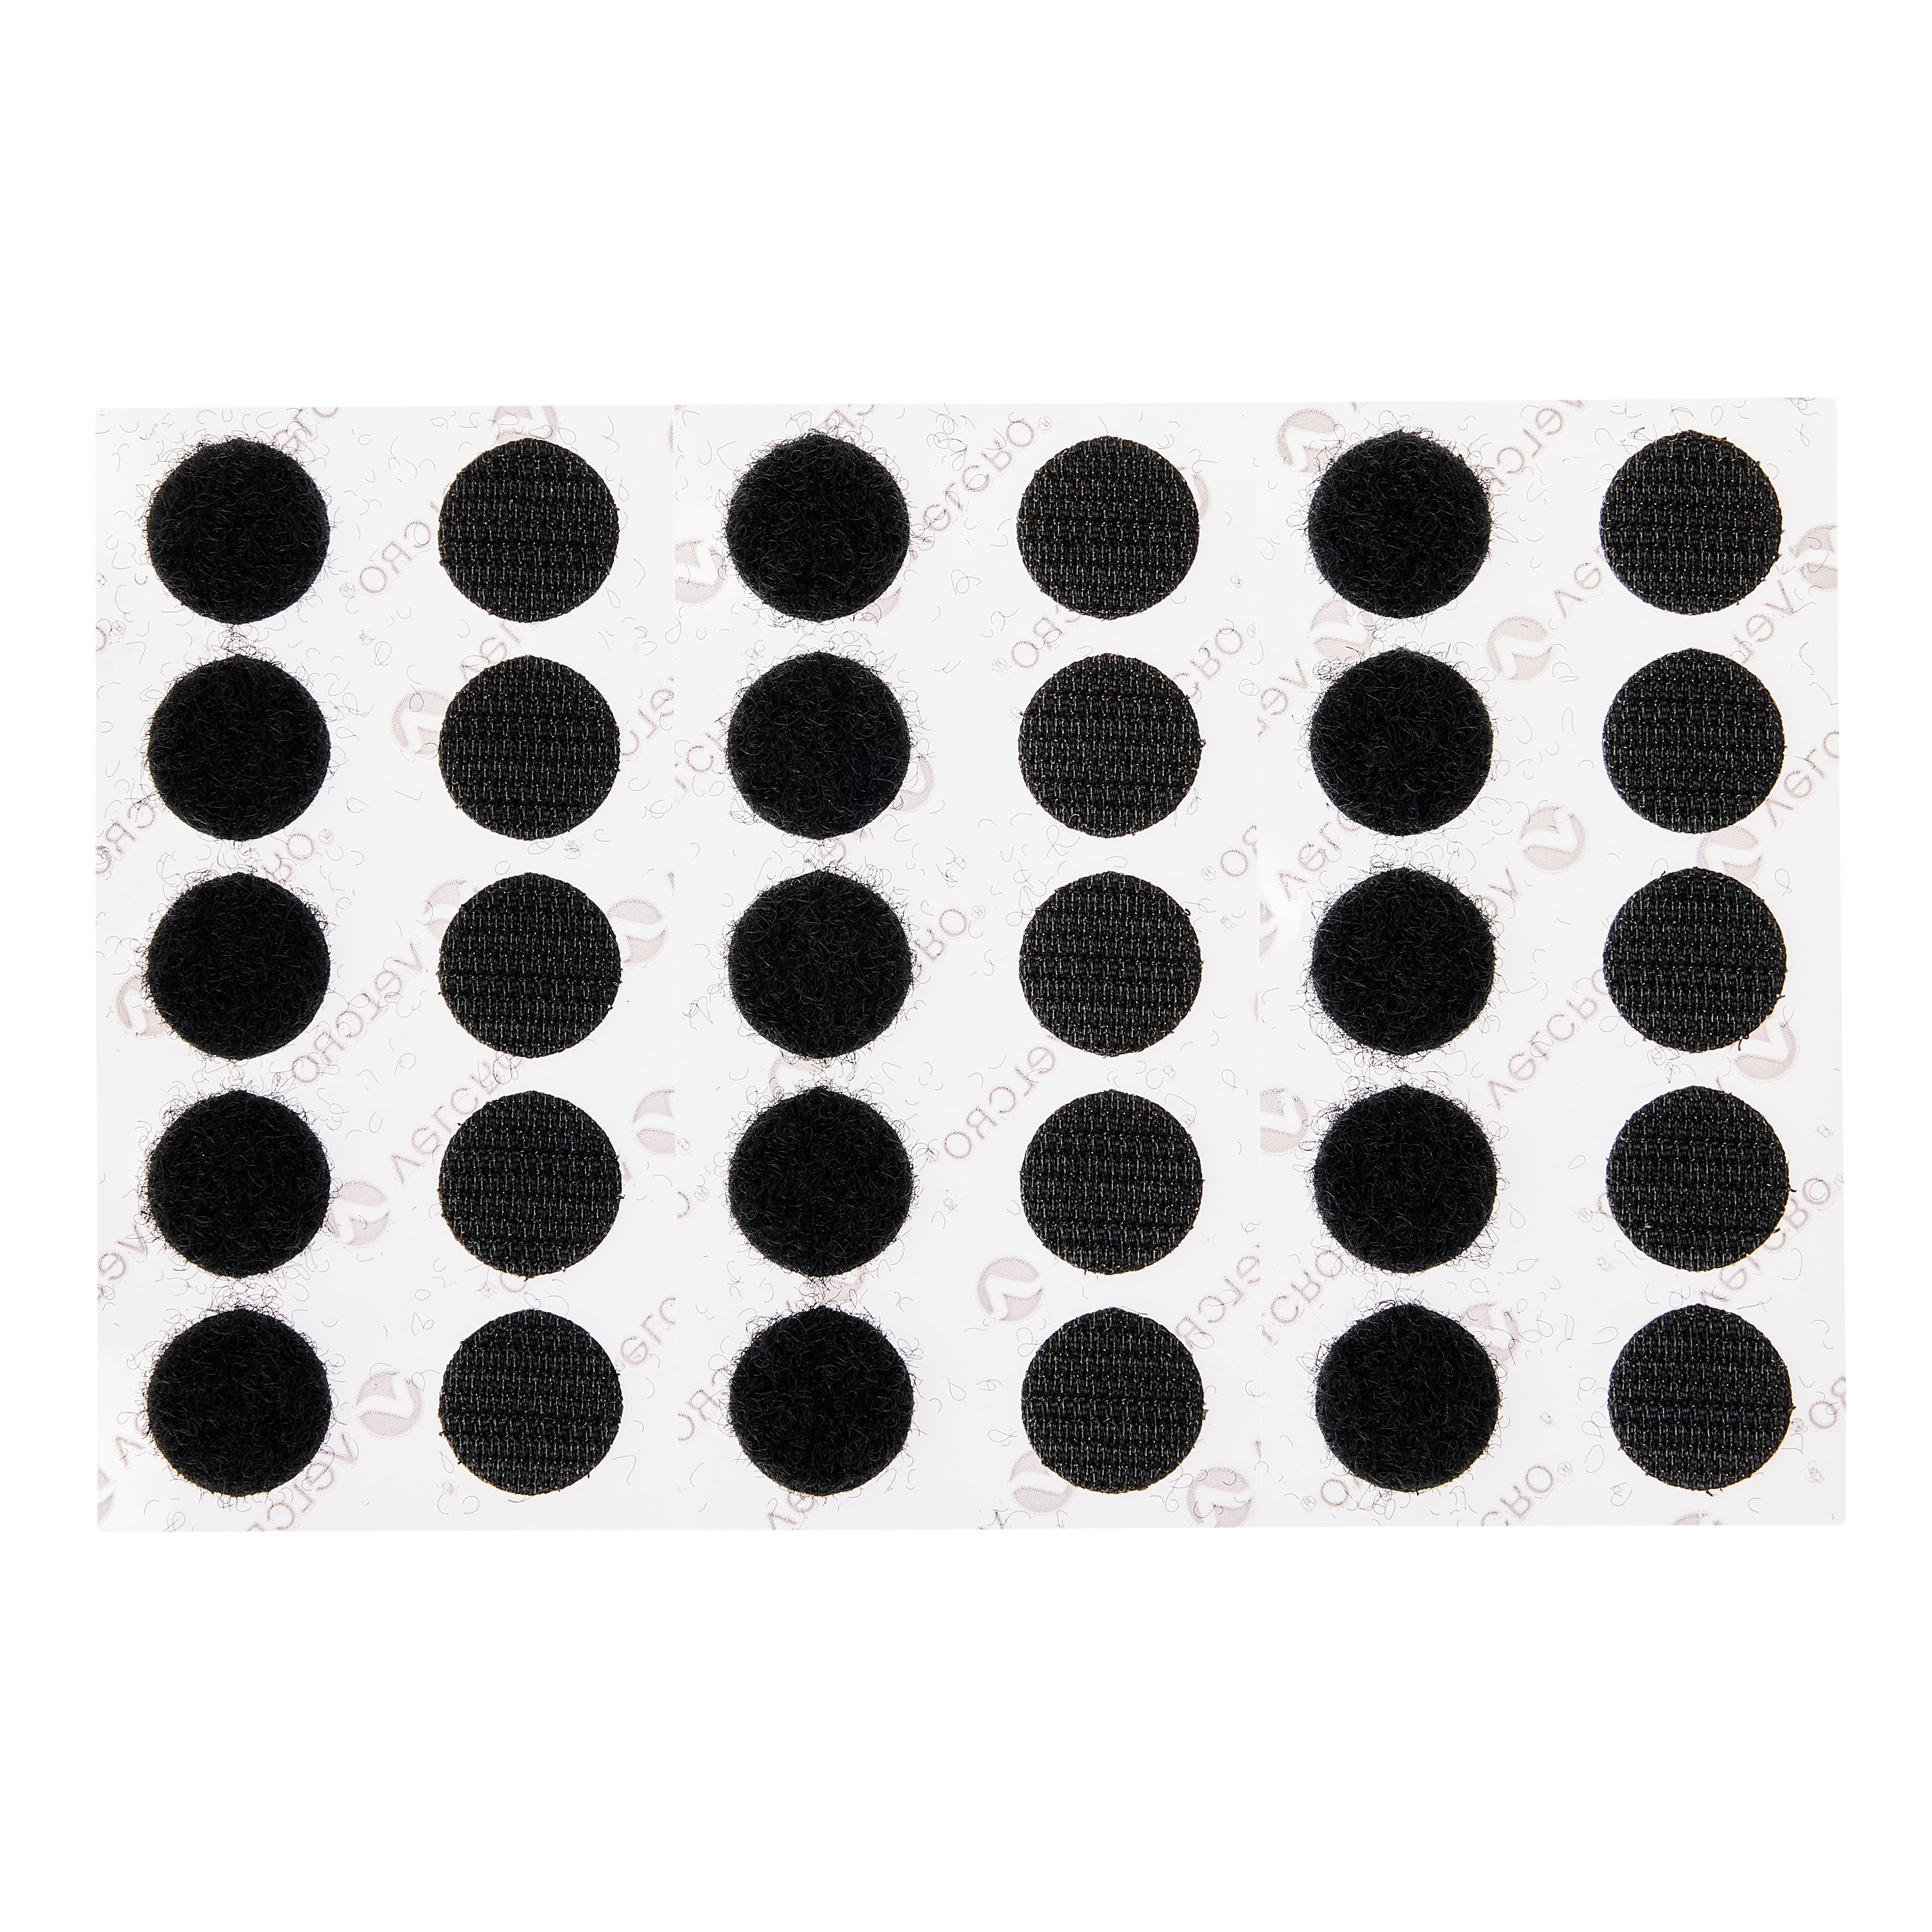 Velcro Sticky Back Peel Fasteners Black Round Shaped 5/8 in (1.5cm) 15  Circles